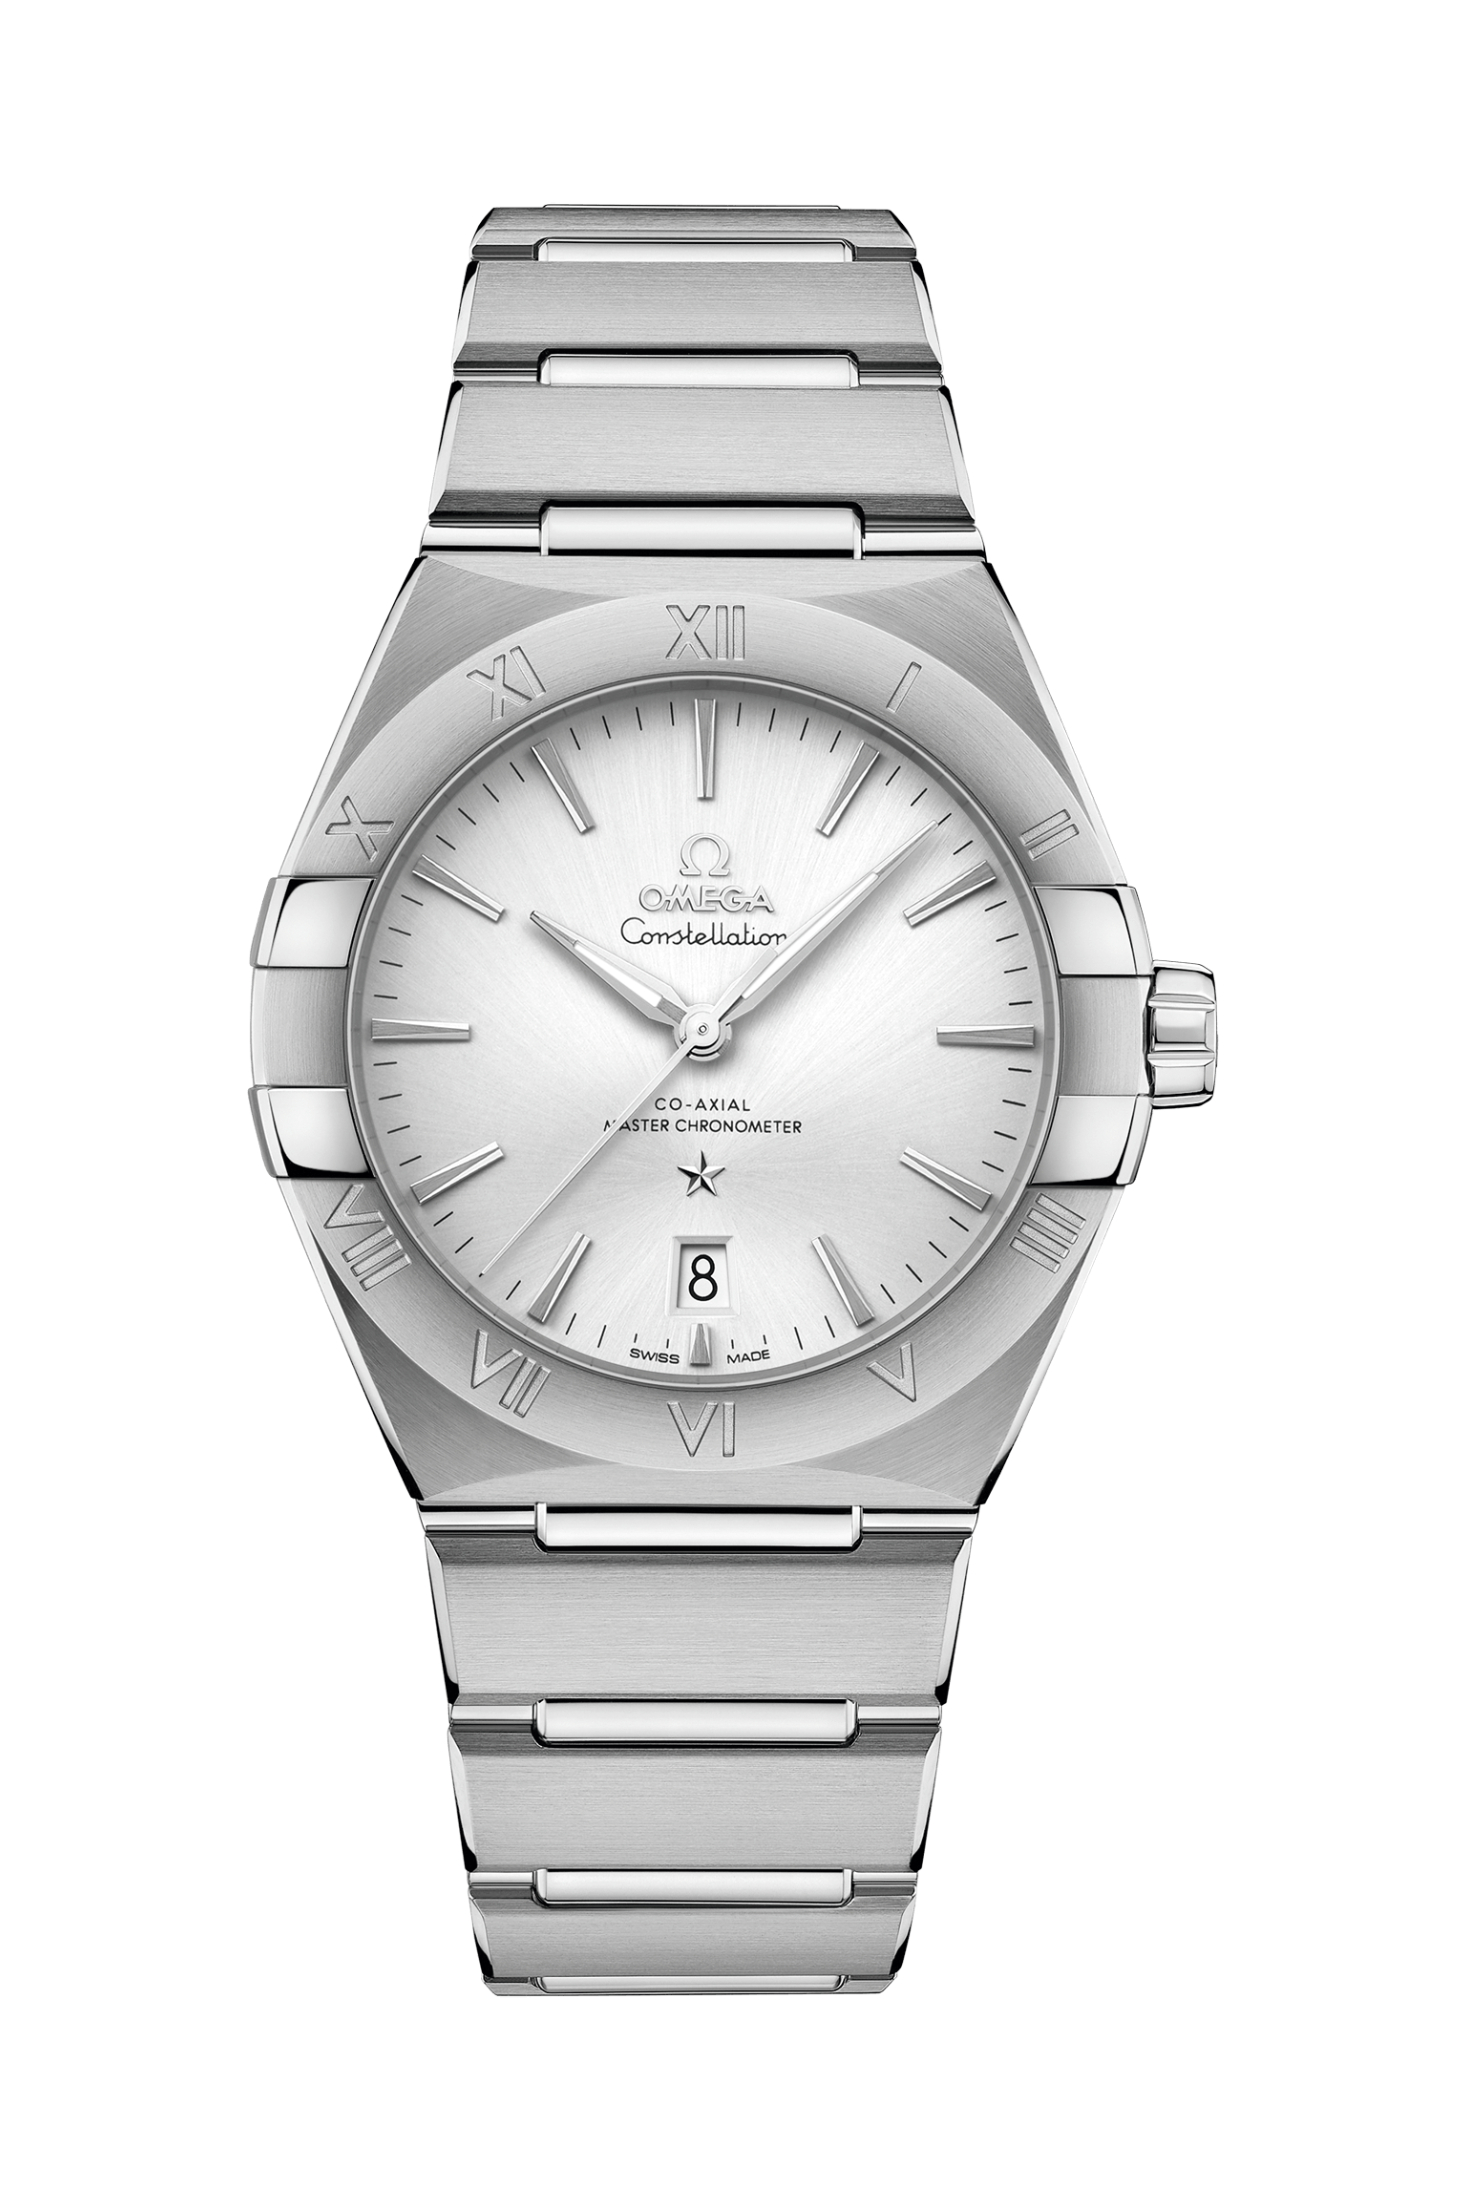 Men's watch / unisex  OMEGA, Constellation Co Axial Master Chronometer / 39mm, SKU: 131.10.39.20.02.001 | watchapproach.com